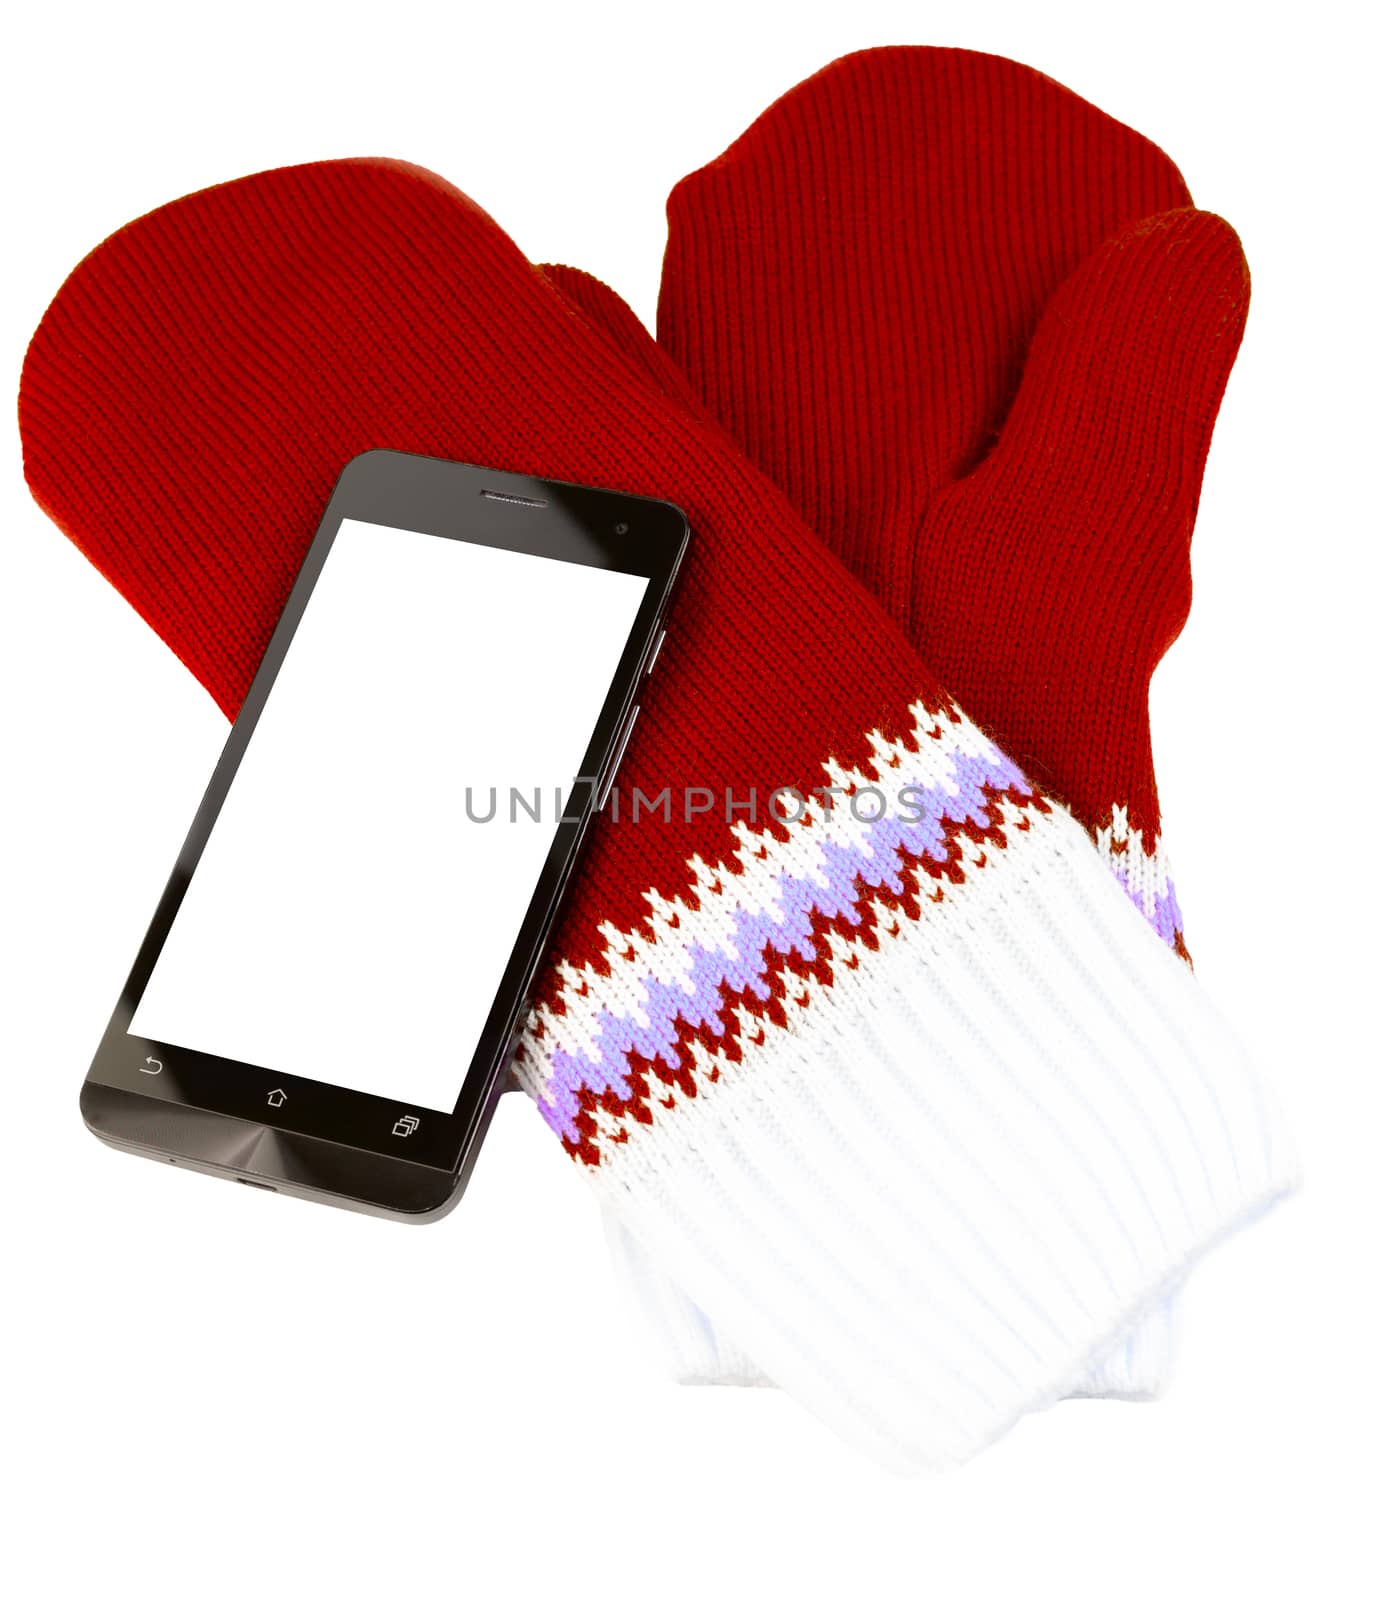 red and white knited mittens with cellphone isolated on white background by z1b